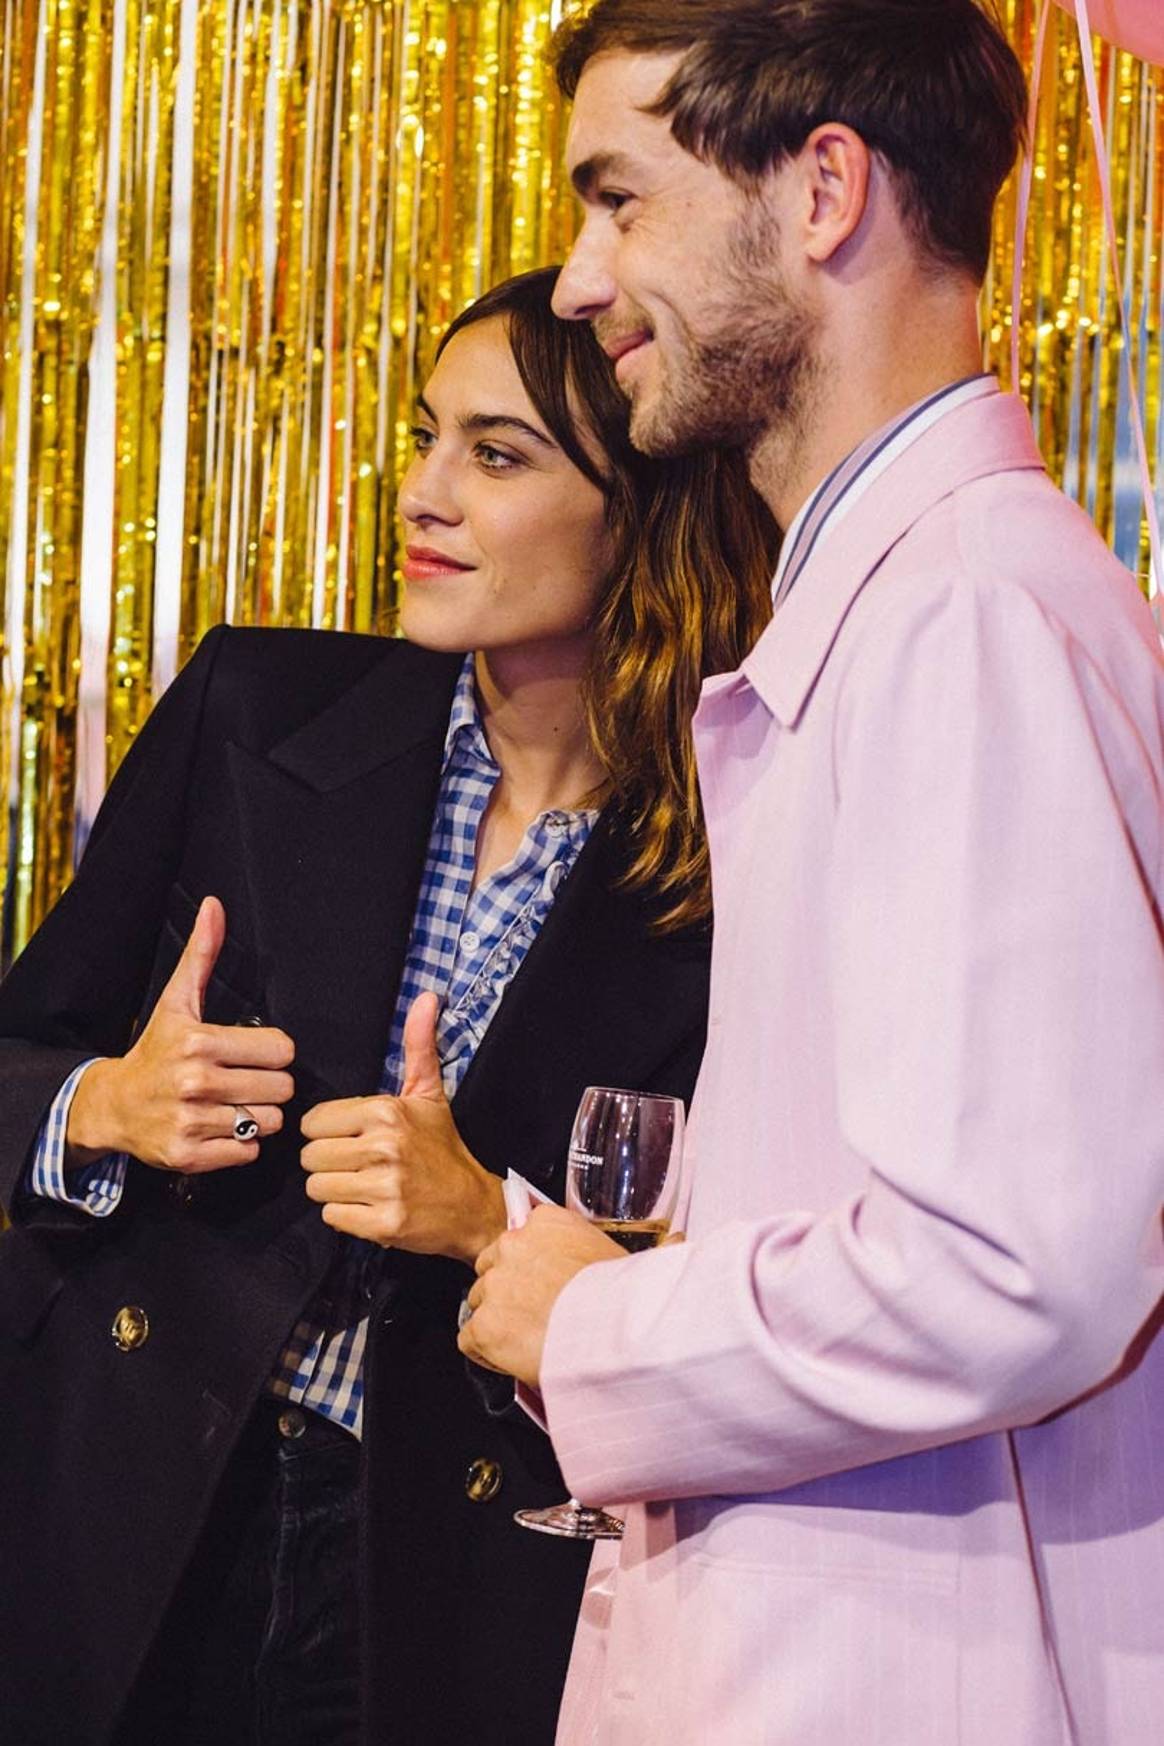 Alexa Chung on launching her label: ‘Shit got real pretty quickly’